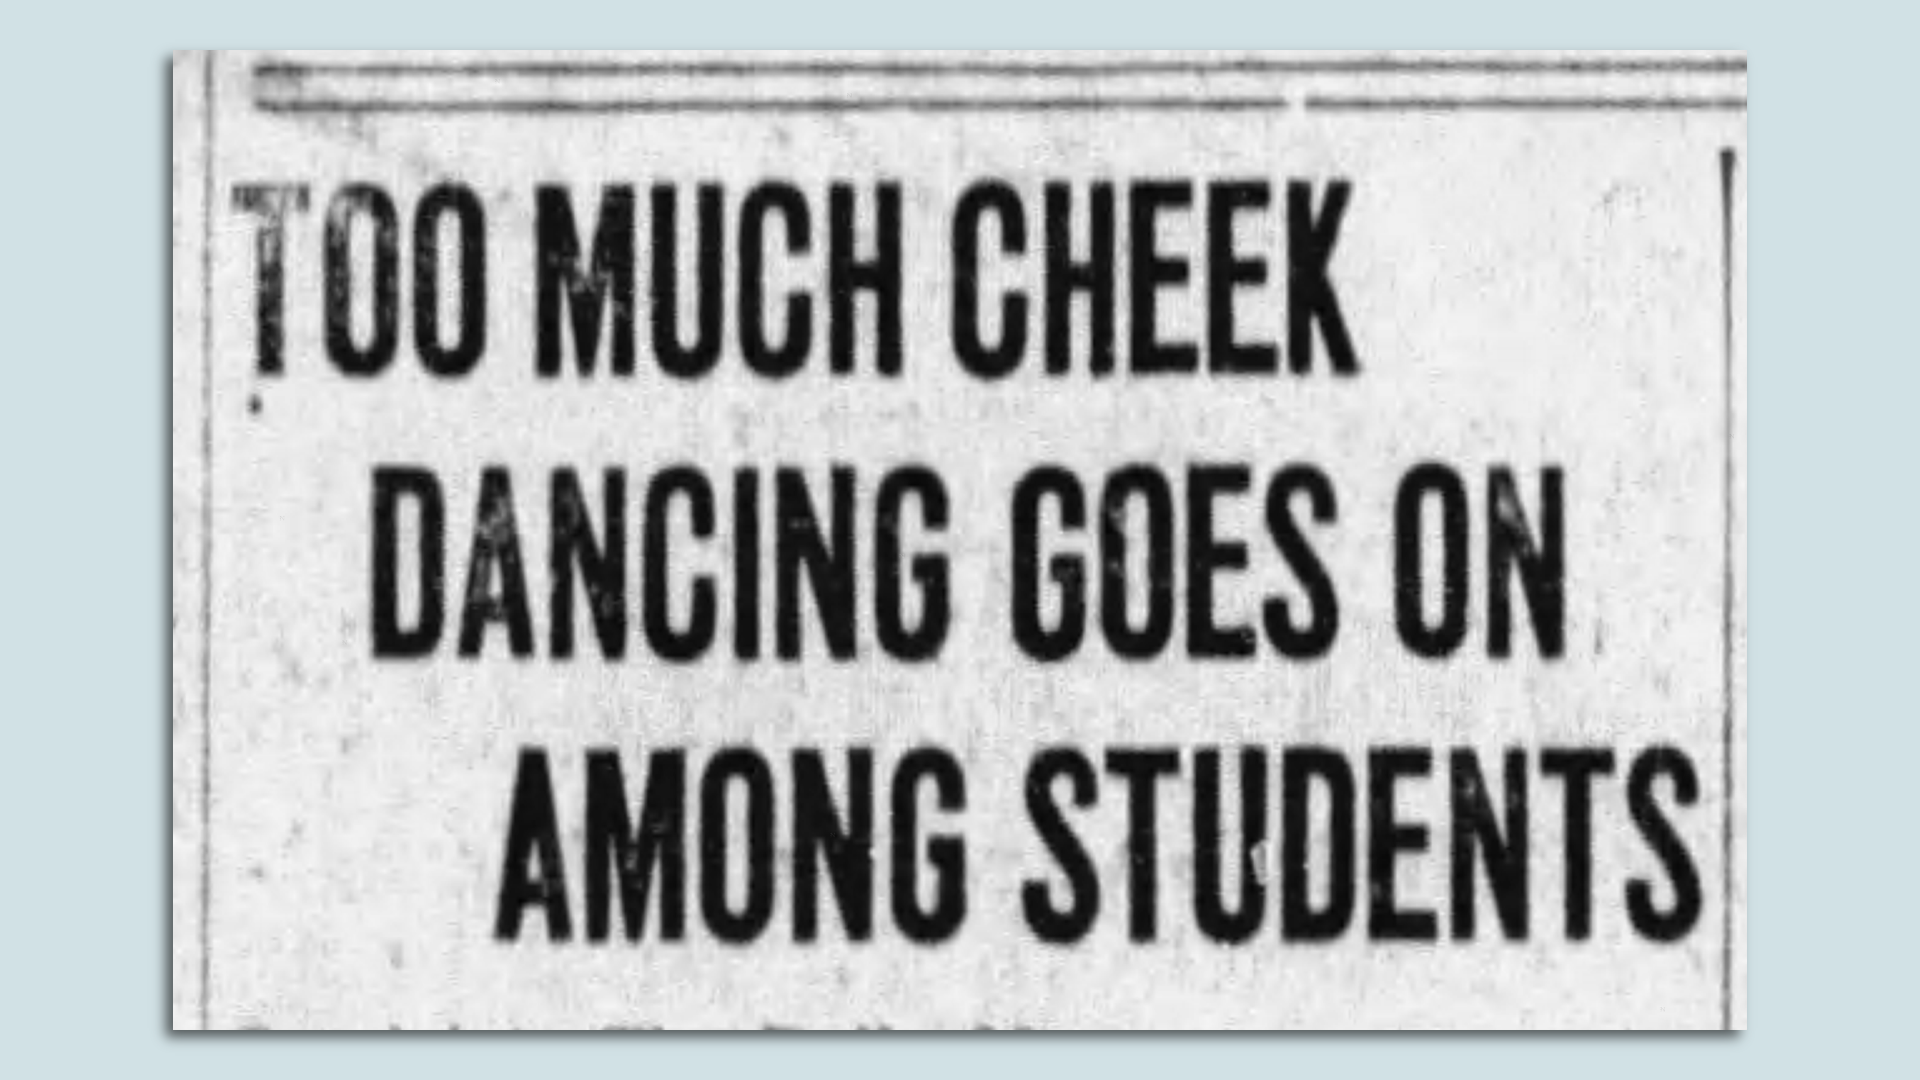 A newspaper headline reading, "Too much cheek dancing goes on among students."